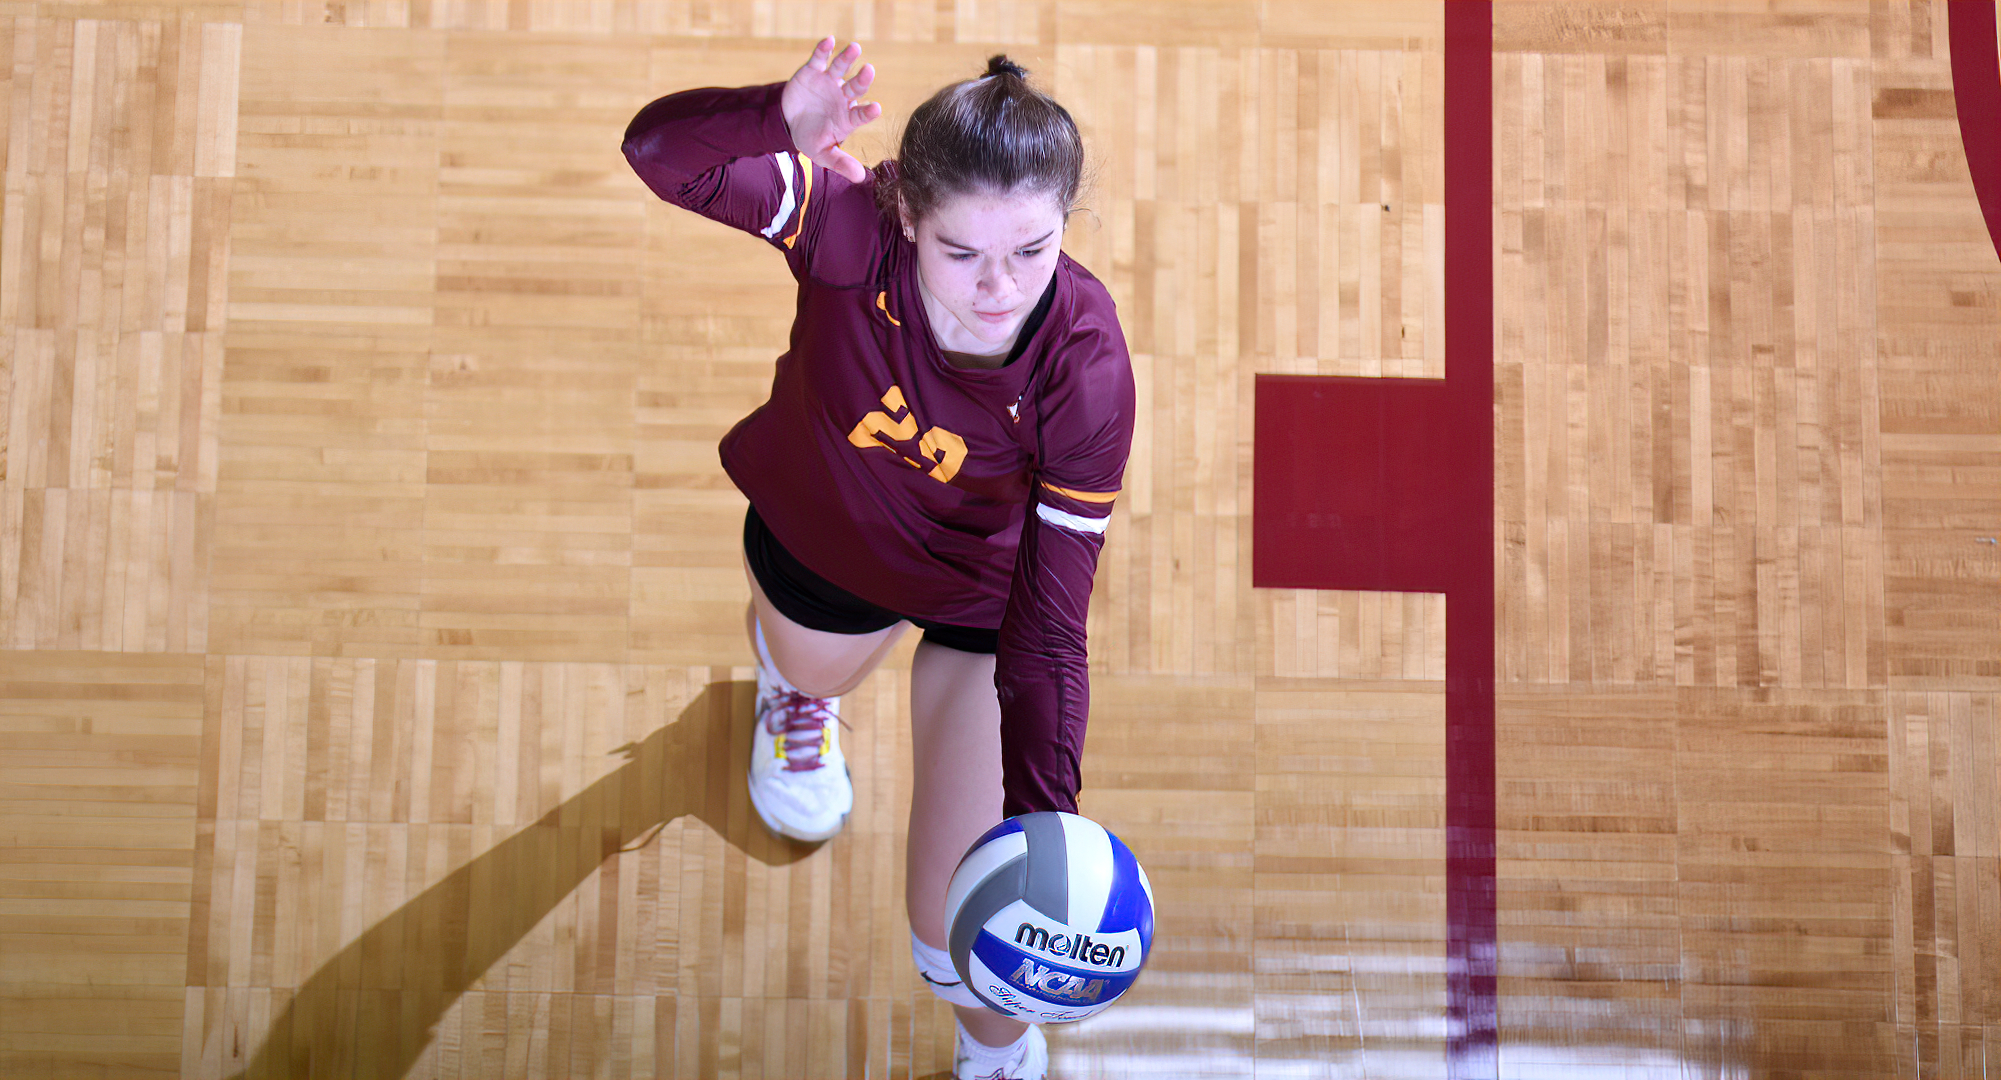 Freshman Hanna Mooney had a team-high 13 digs in the Cobbers 3-1 win at Crown. She has at least 10 digs in two of the last three matches.